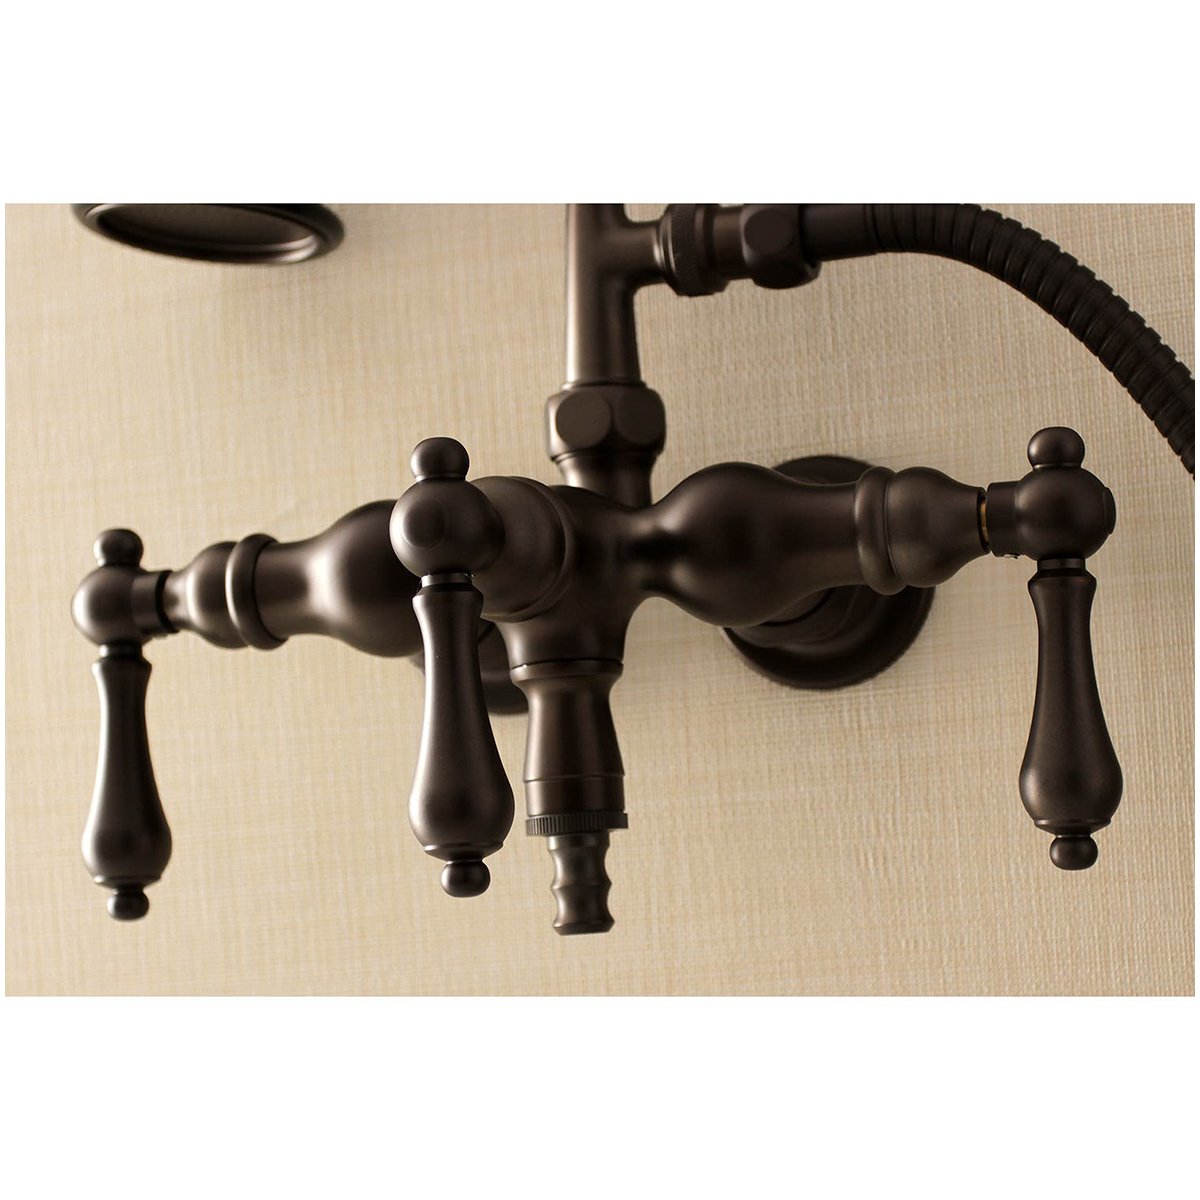 Aqua Vintage AE19TX-P 3-3/8-Inch Wall Mount Tub Faucet with Hand Shower